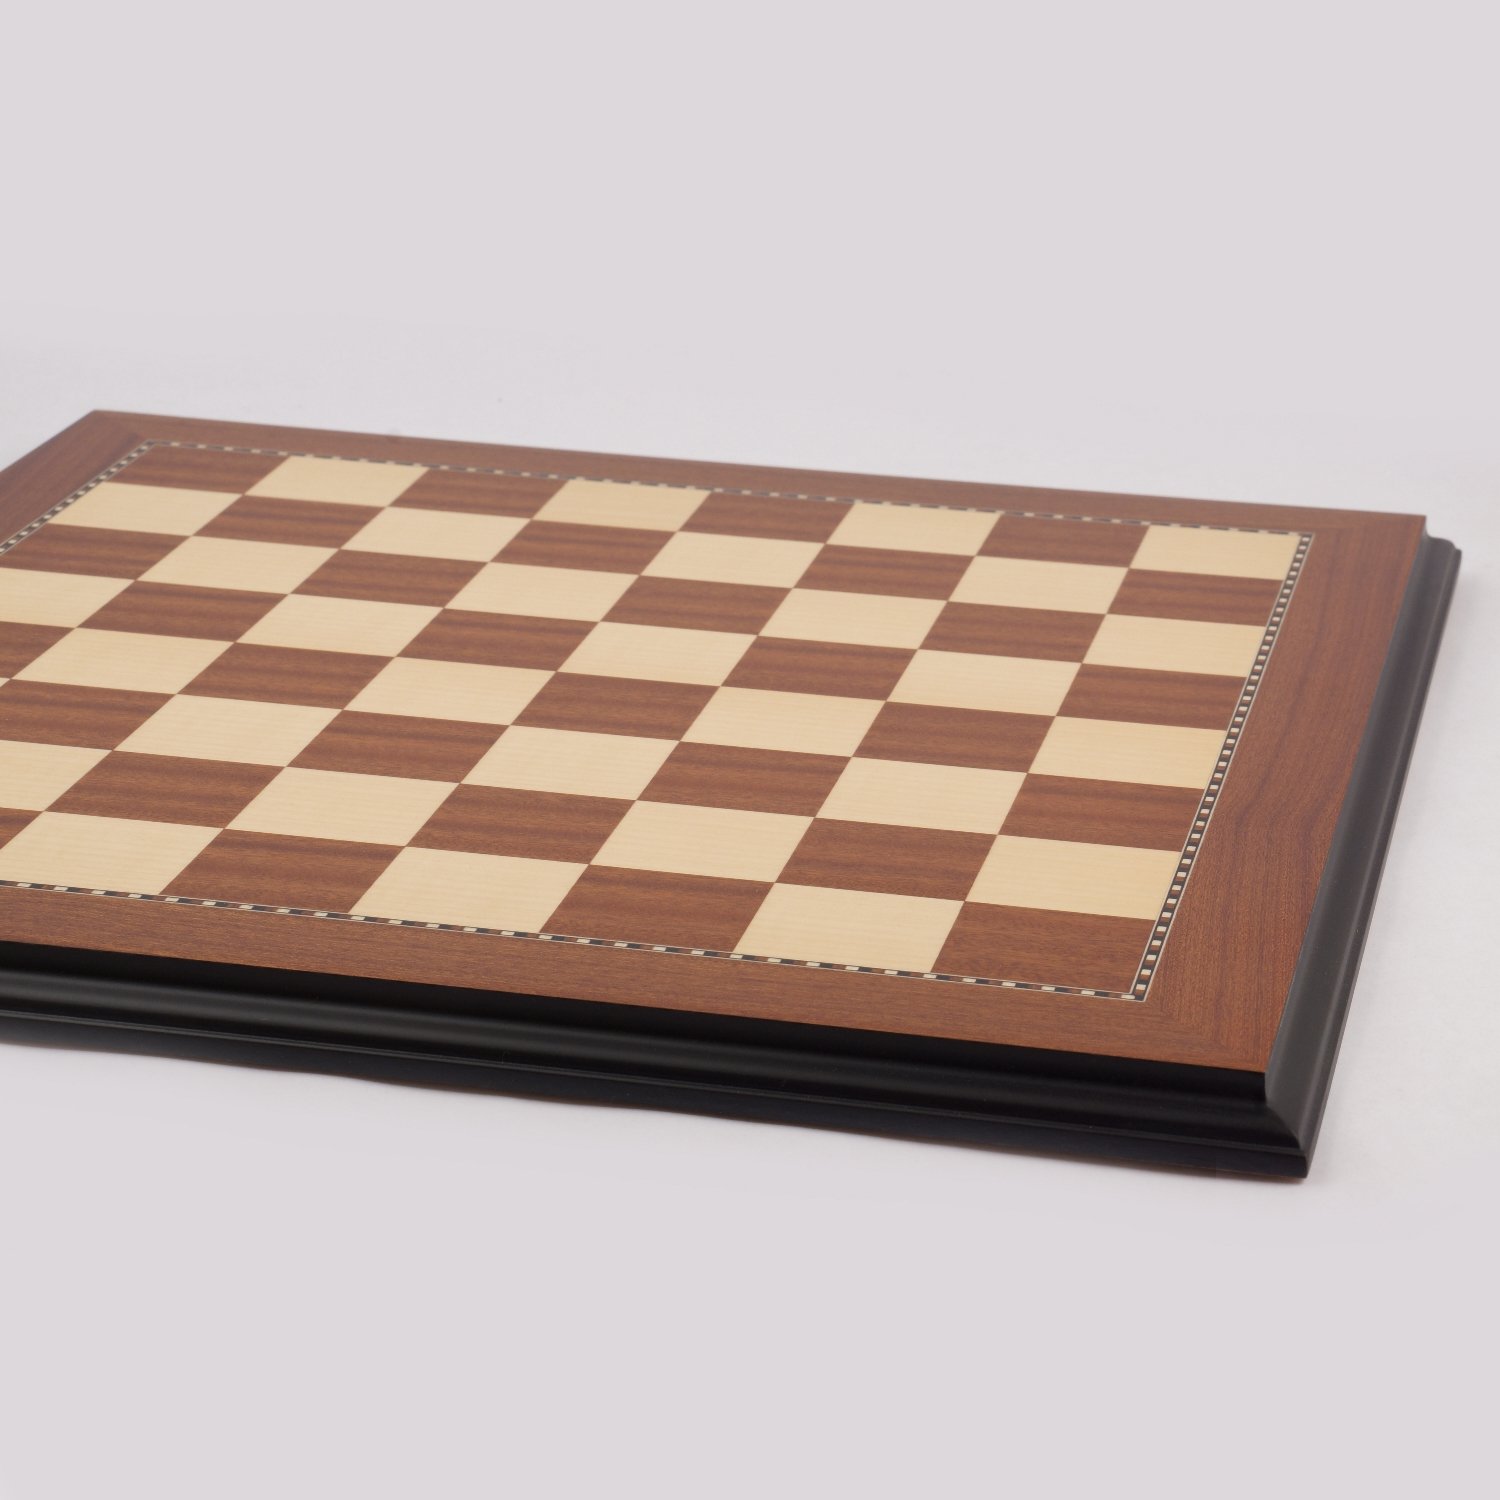 Luxury Chess Board Solid Wood Tournament Series Wood Chess 